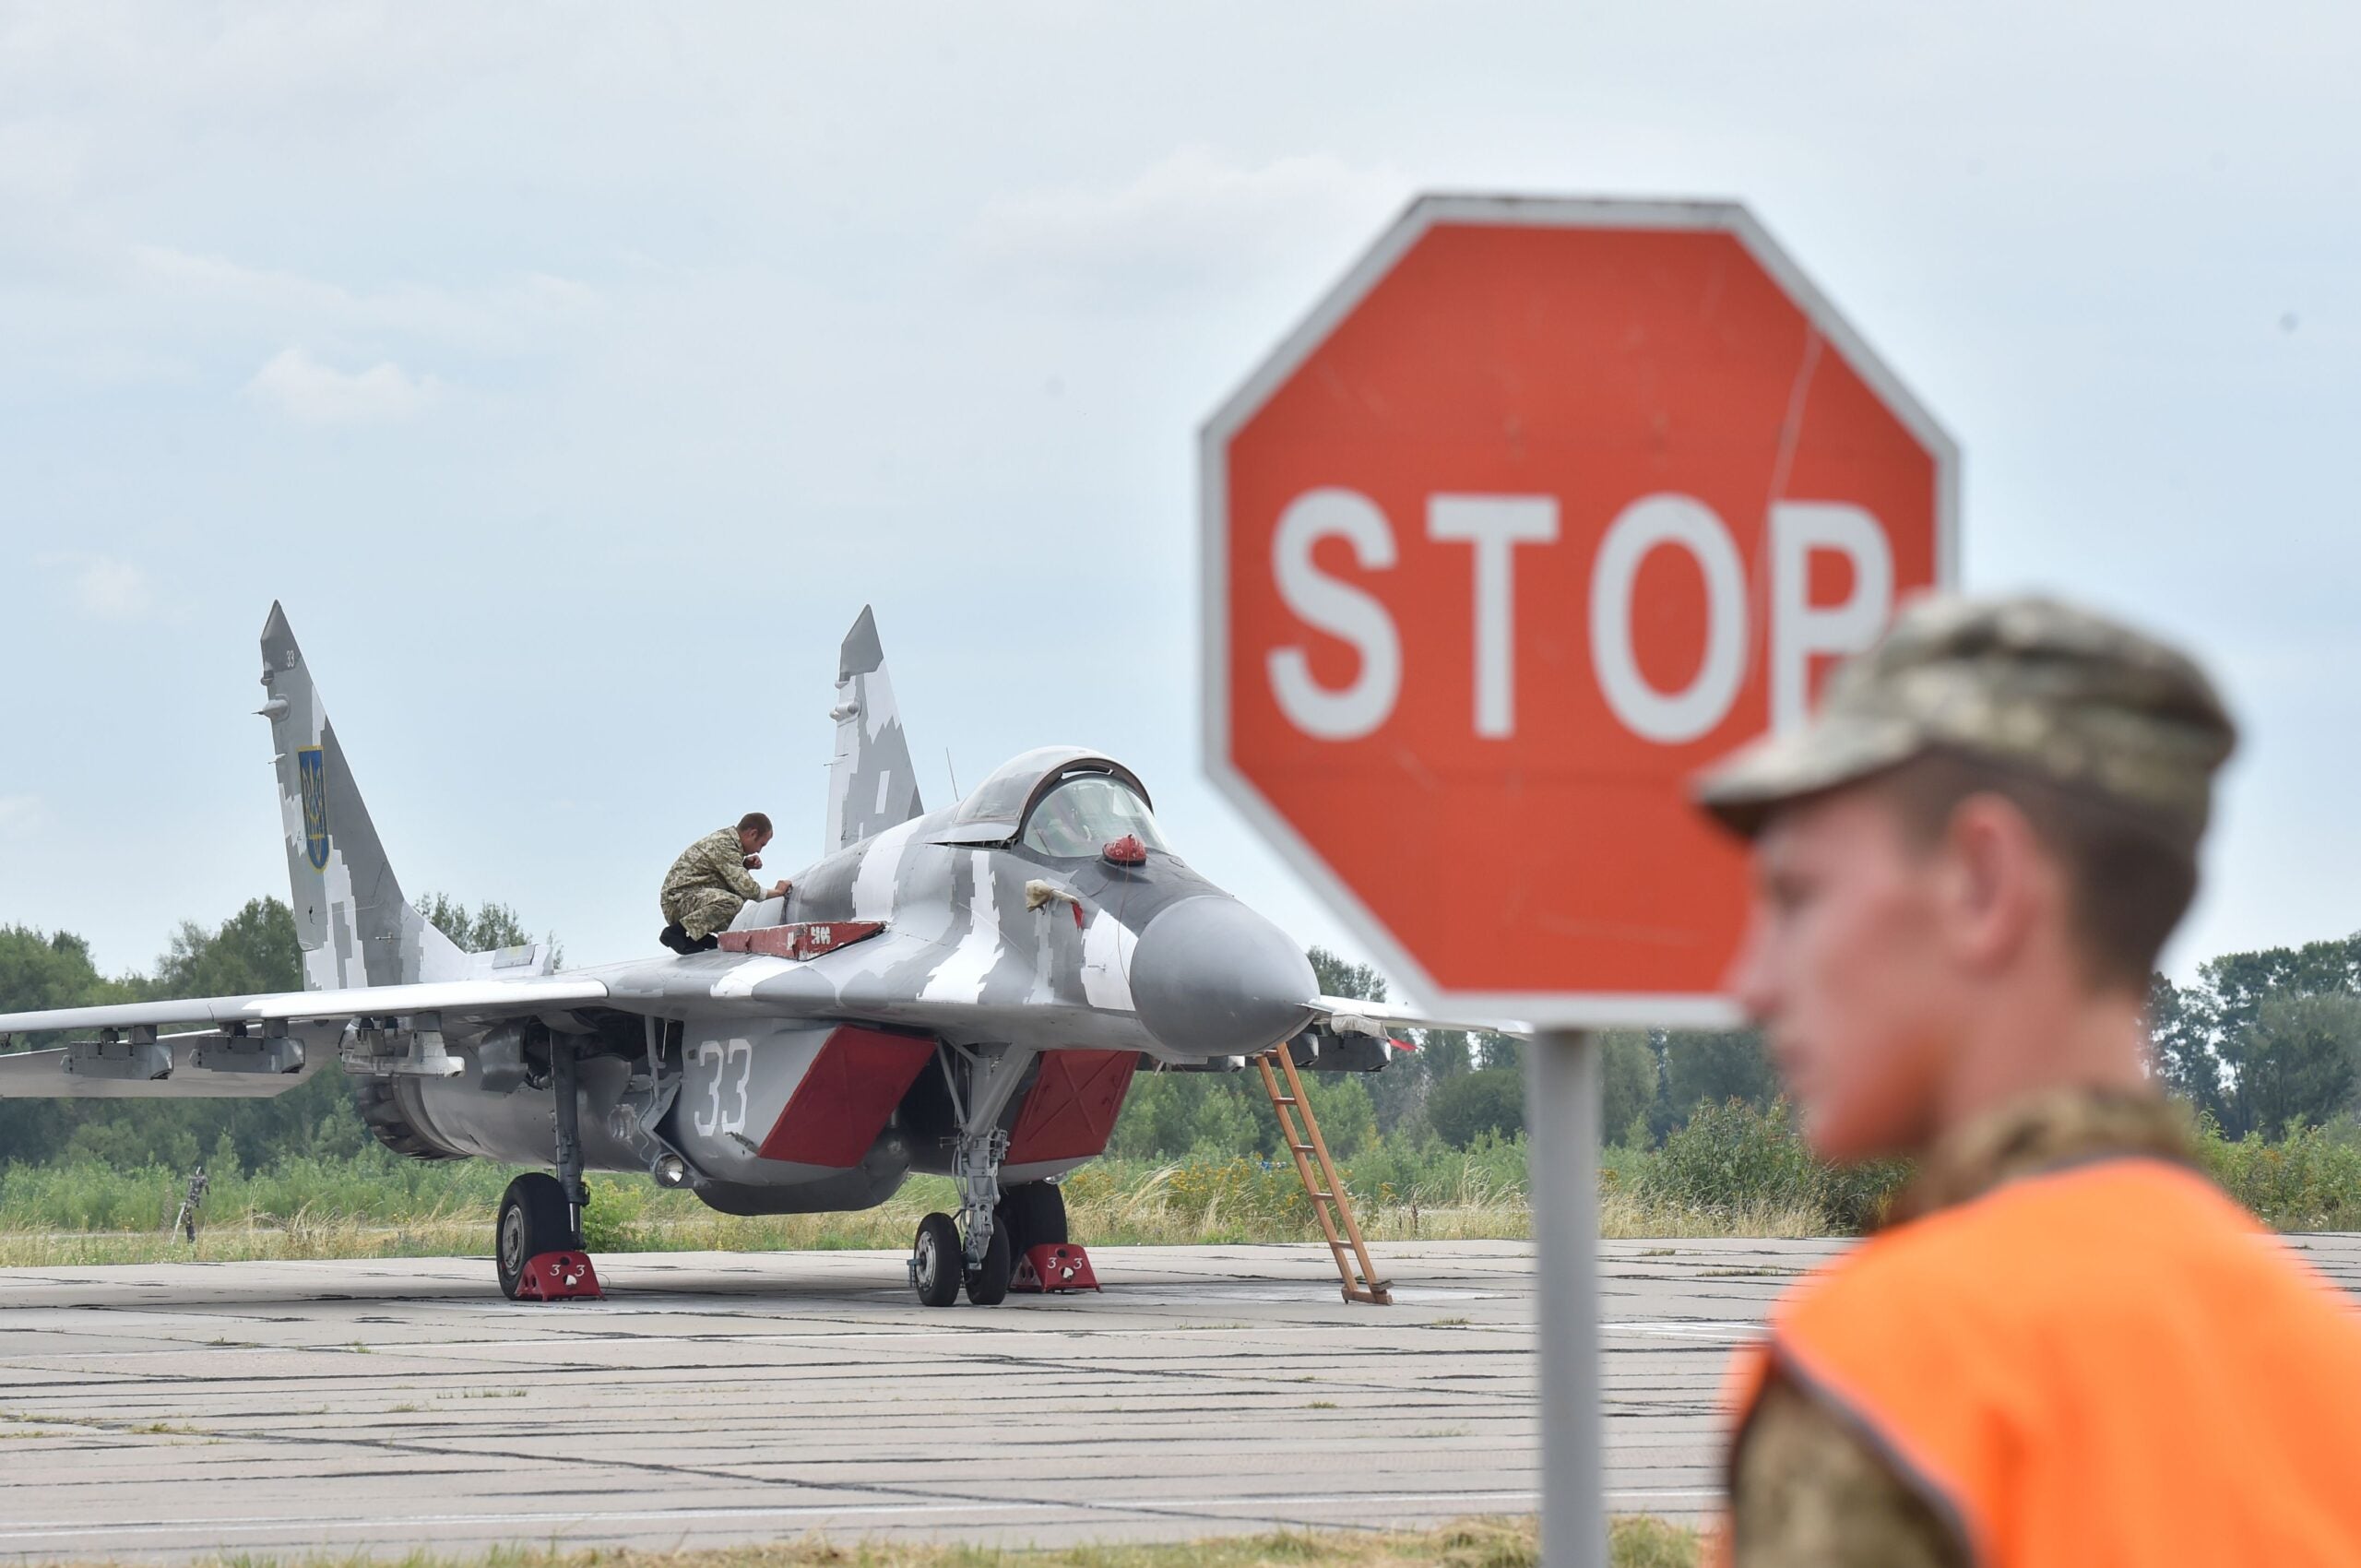 A technician prepares a Ukrainian MIG-29 fighter (NATO reporting name "Fulcrum") for its taking off prior to a practical flight during exercises at the Air Force military base in the small town of Vasylkiv, some 40km from Kiev on August 3, 2016.  / AFP / SERGEI SUPINSKY        (Photo credit should read SERGEI SUPINSKY/AFP via Getty Images)